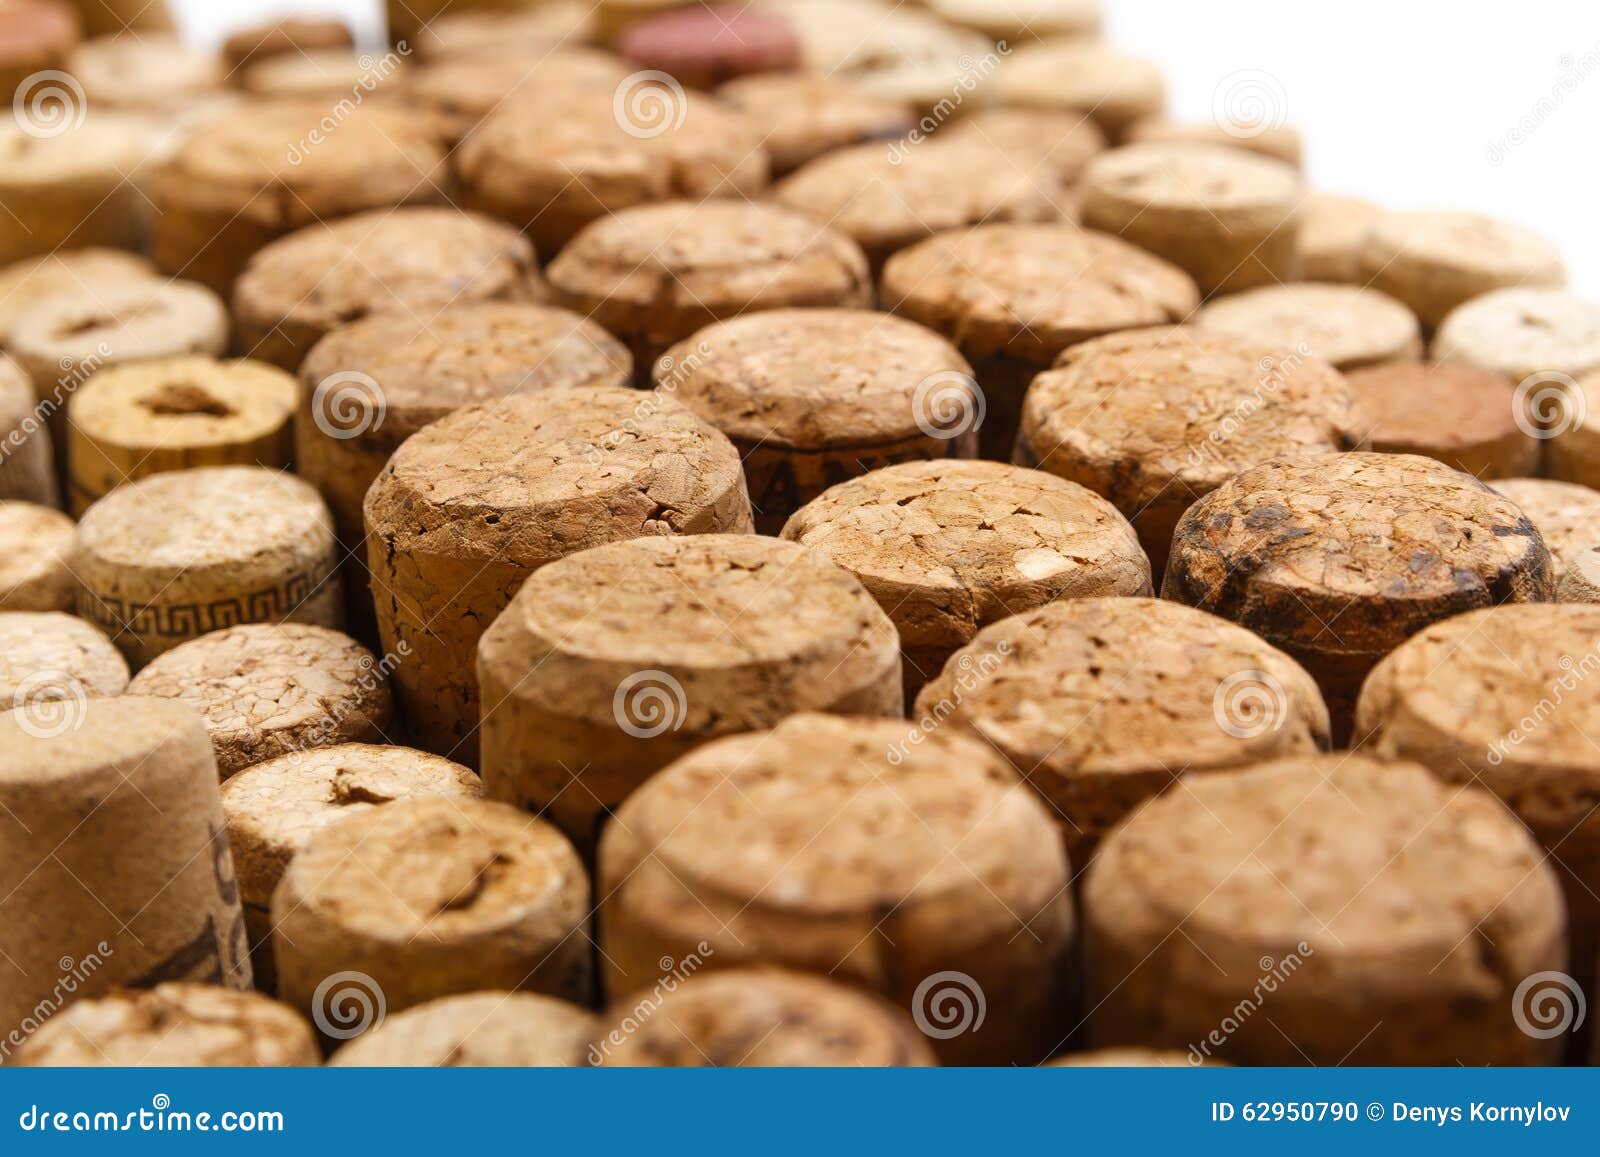 Closeup of used wine corks stock photo. Image of pattern - 62950790